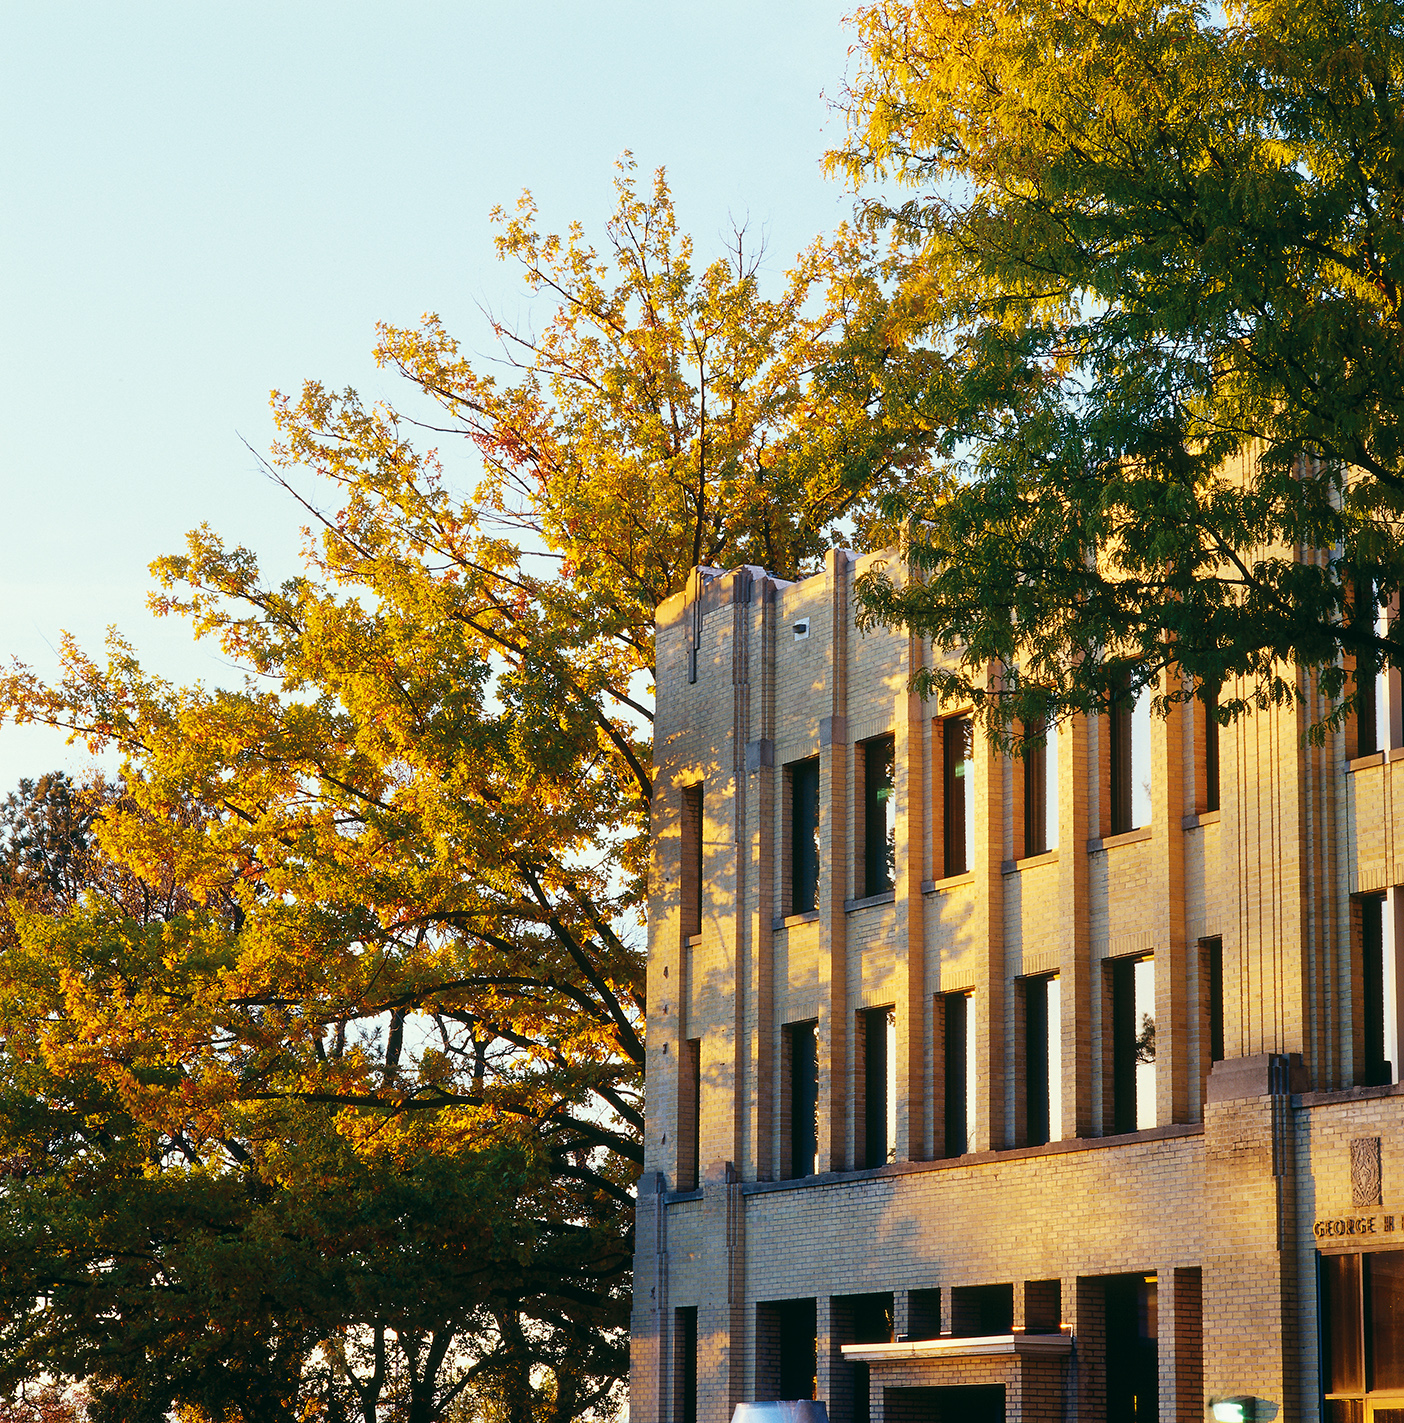 The George H. Brimhall building on BYU campus, surrounded by an English Oak tree.